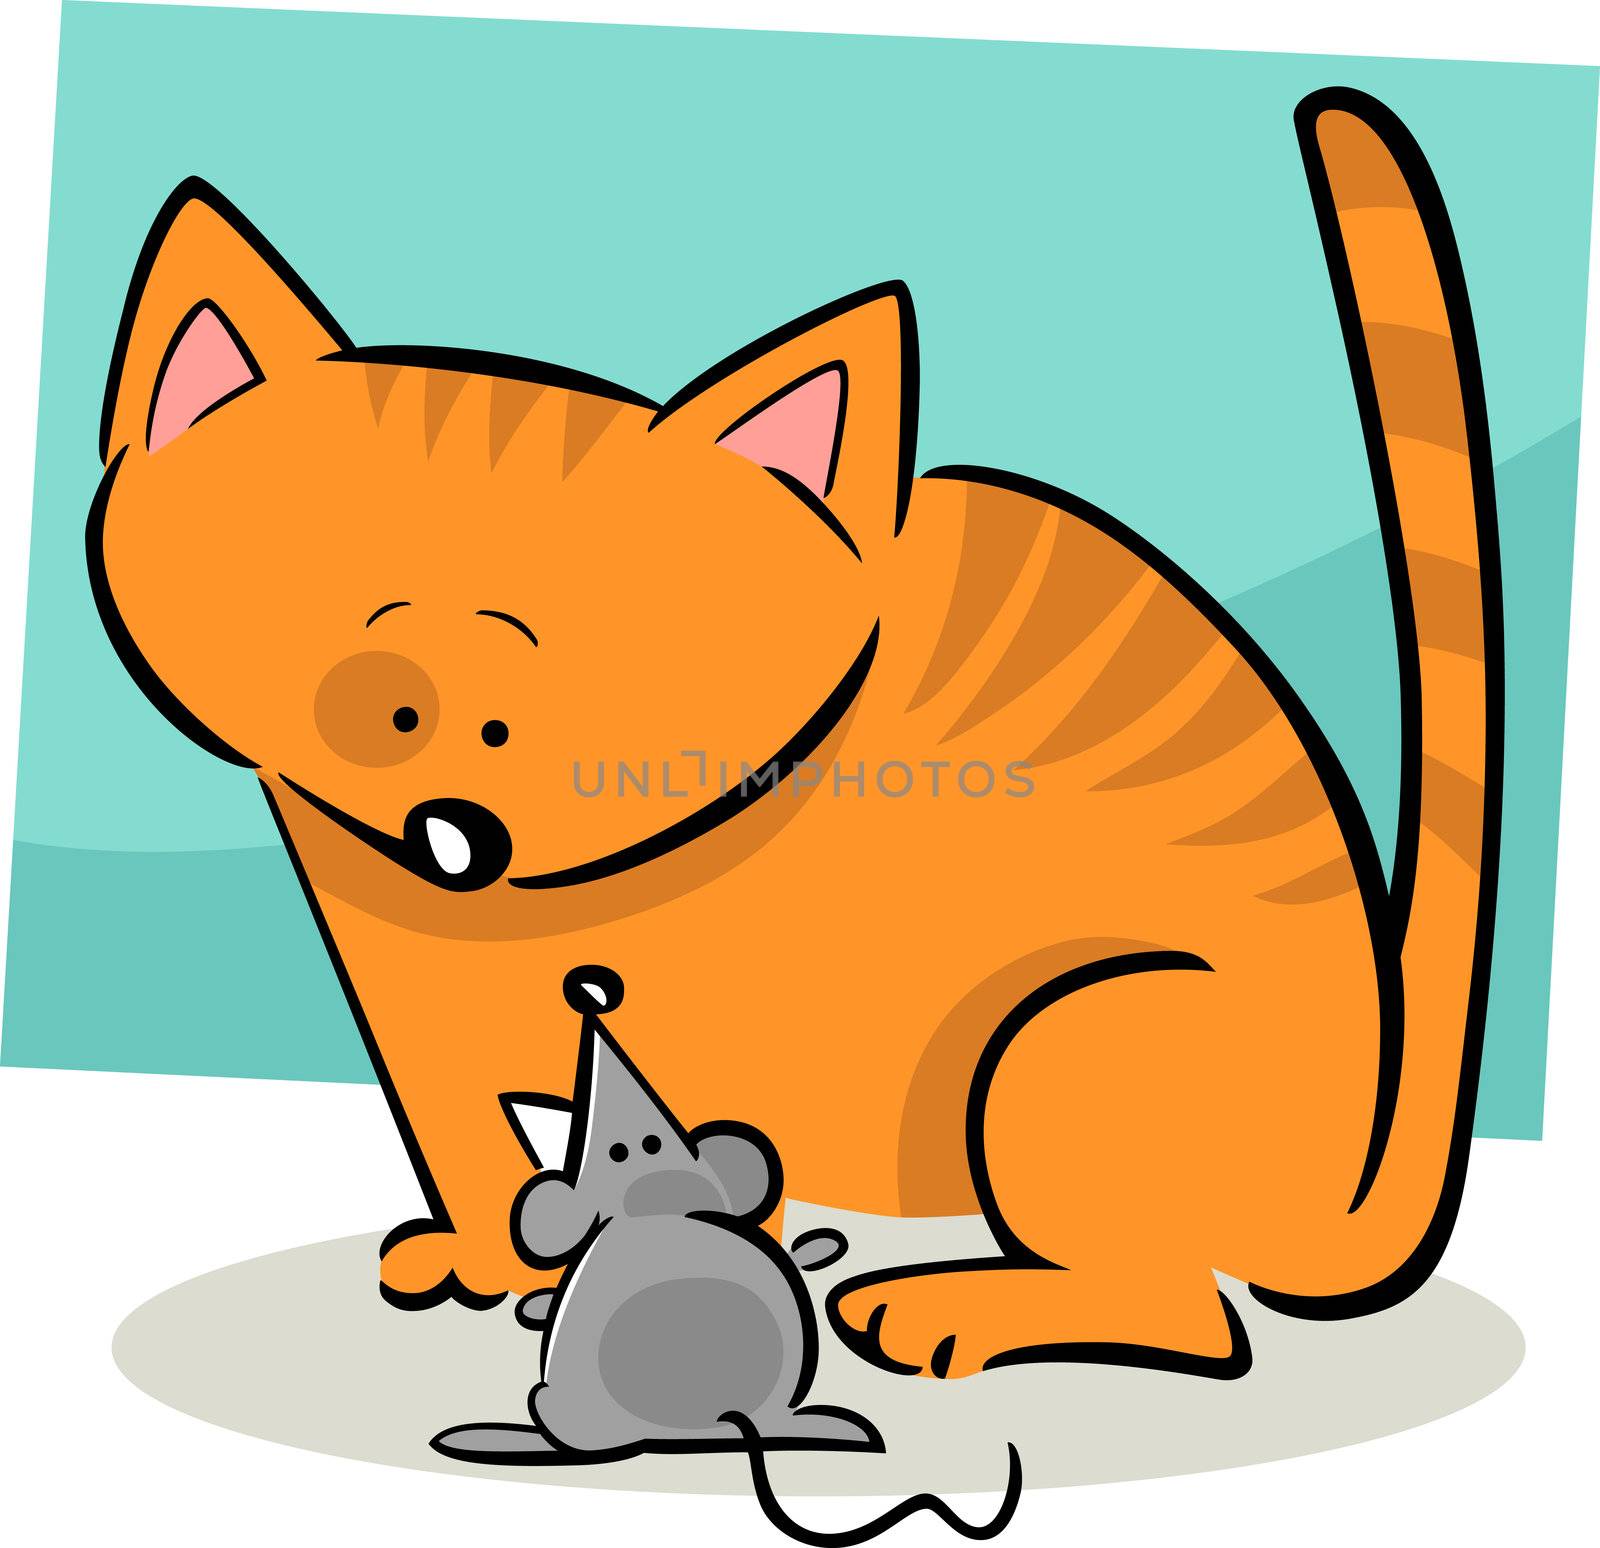 cartoon doodle illustration of kitten and mouse